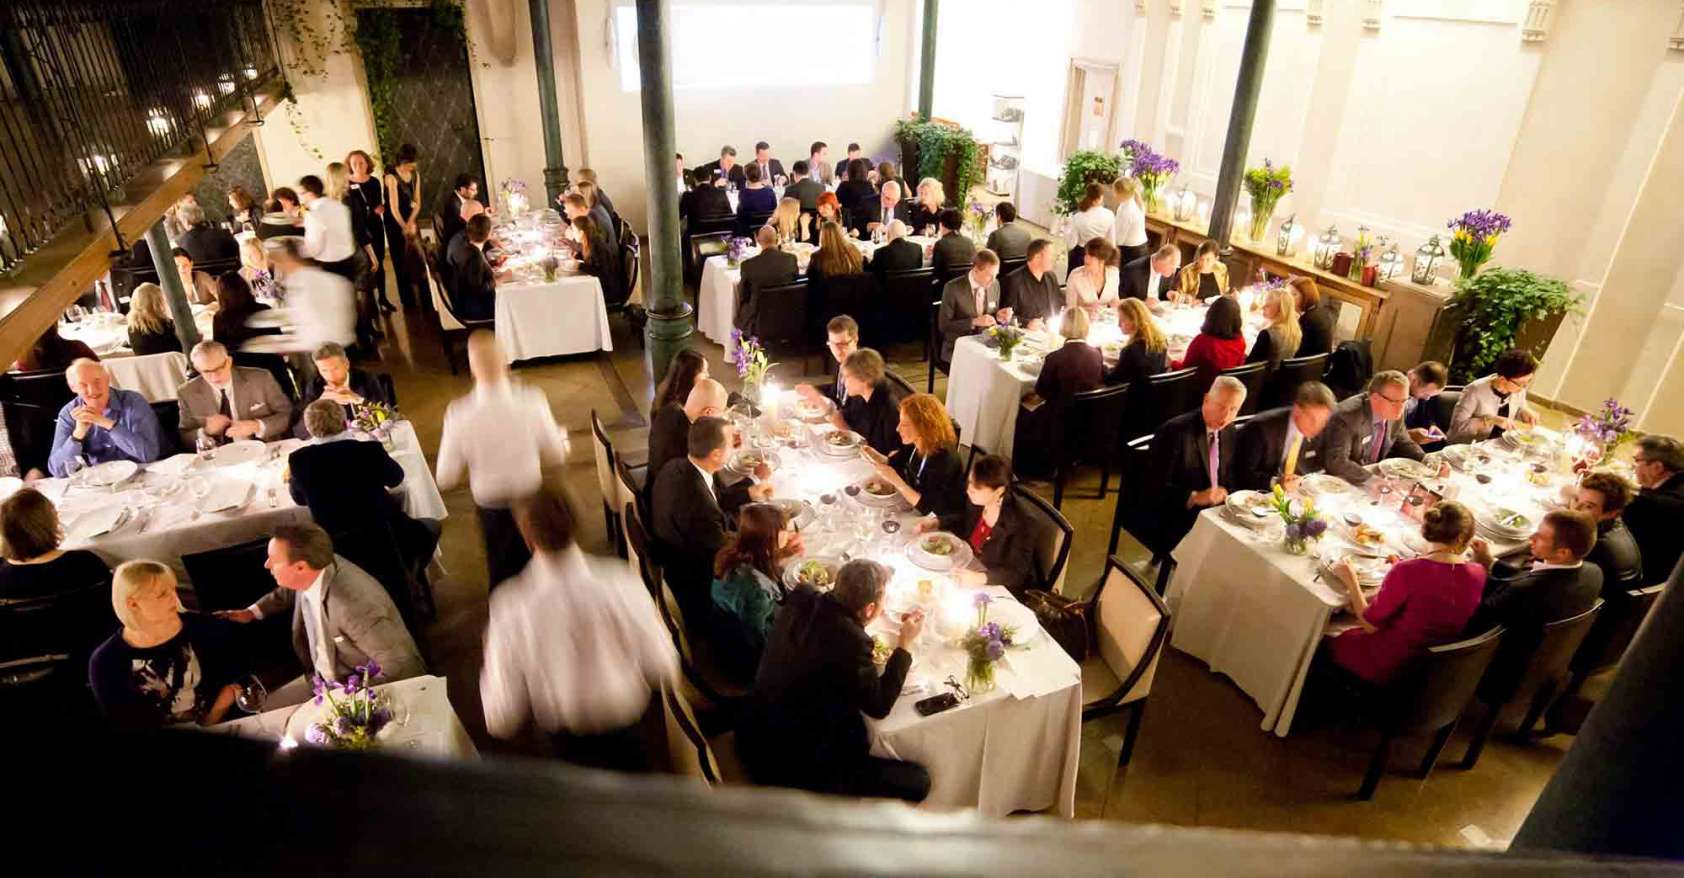 Business people eating dinner at private event special diets